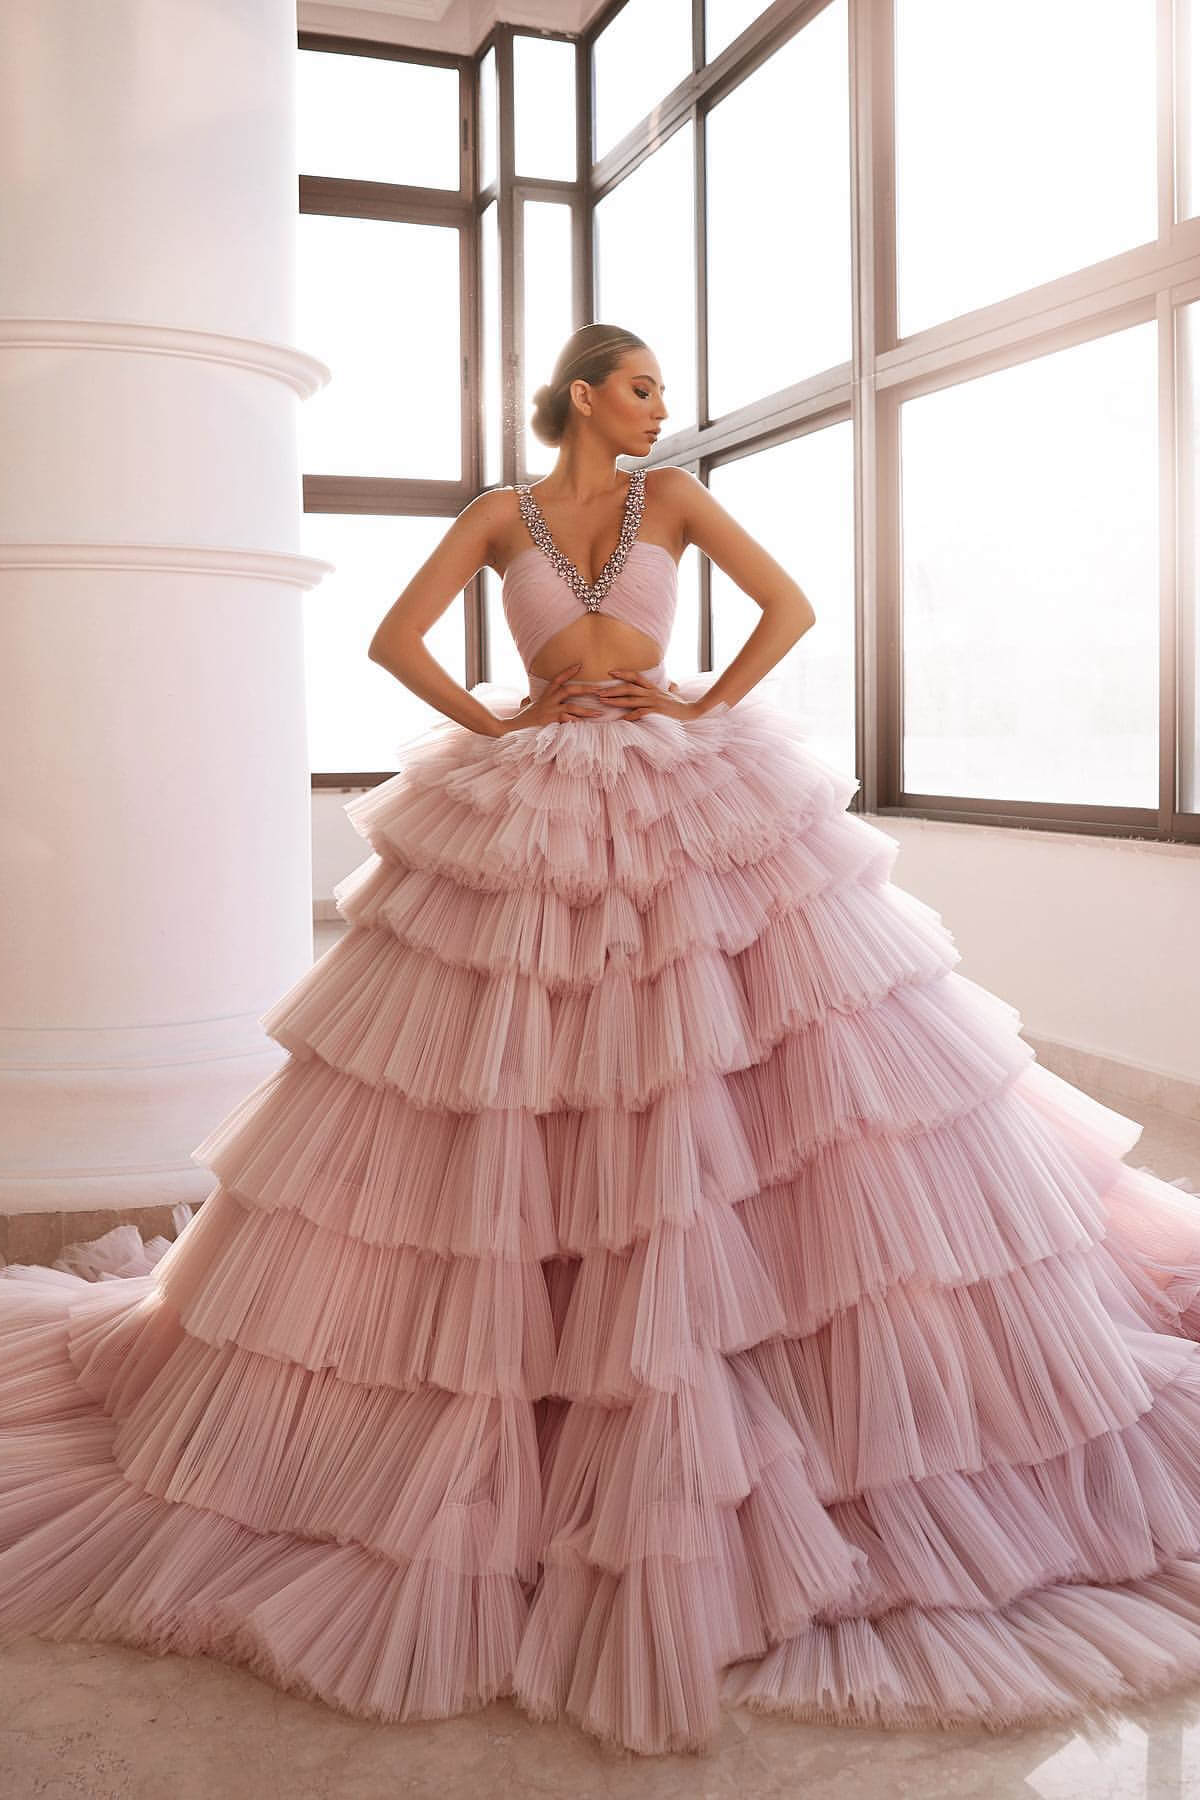 Luxurious Pink V-Neck Deep Sleeveless Prom Dress Tulle Layer| Risias